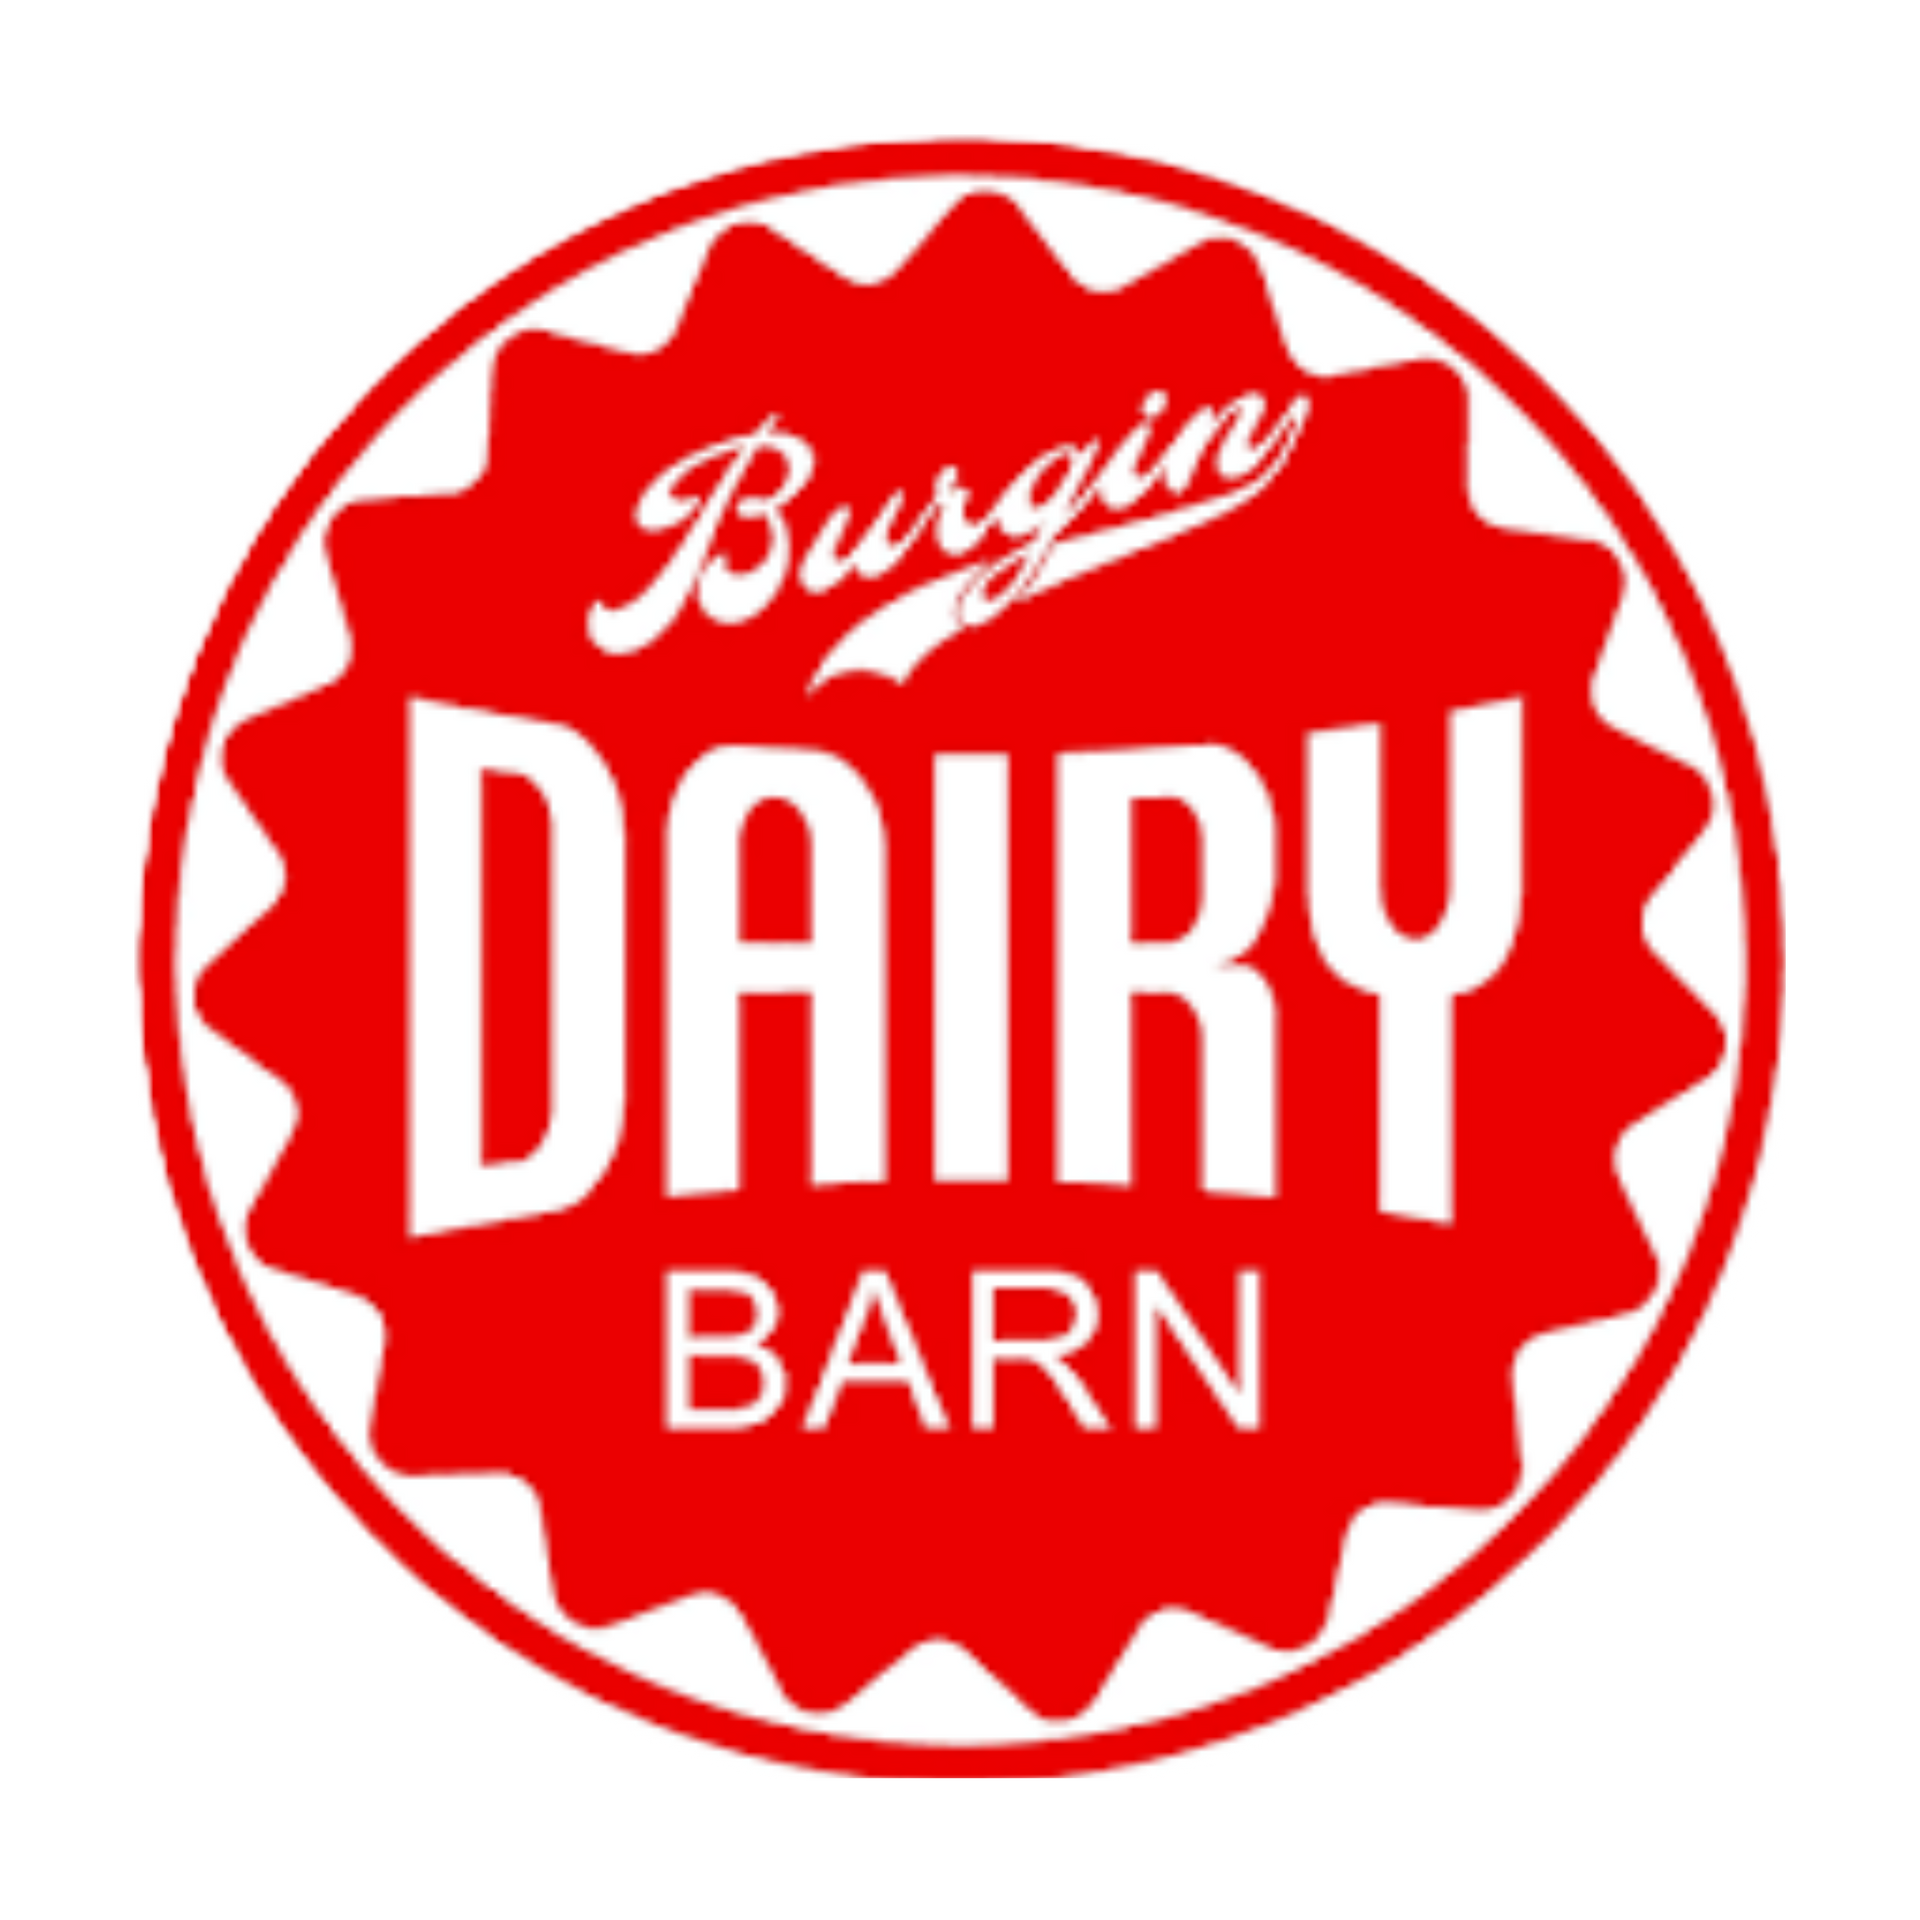 a red dairy barn logo on a white background